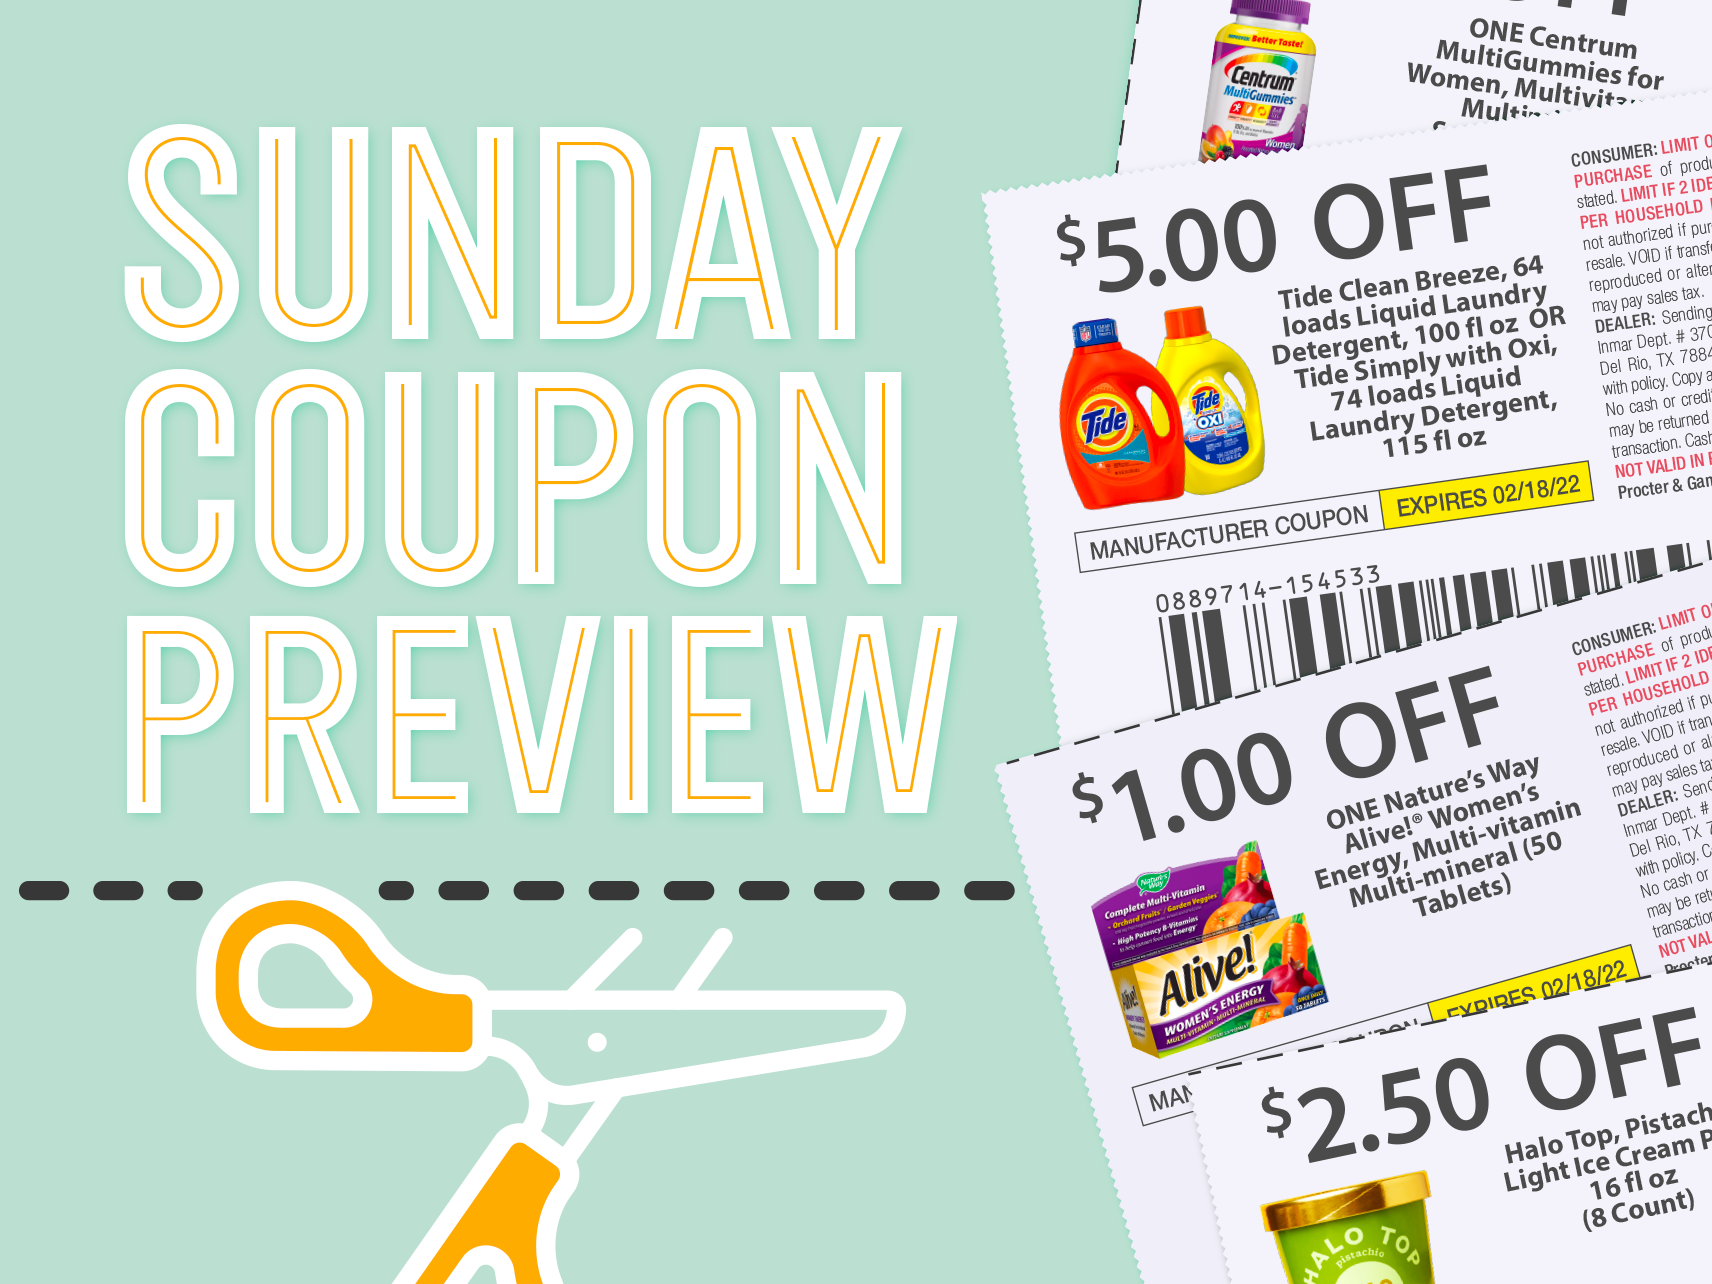 Sunday Coupon Preview For 12/11 – Two Inserts